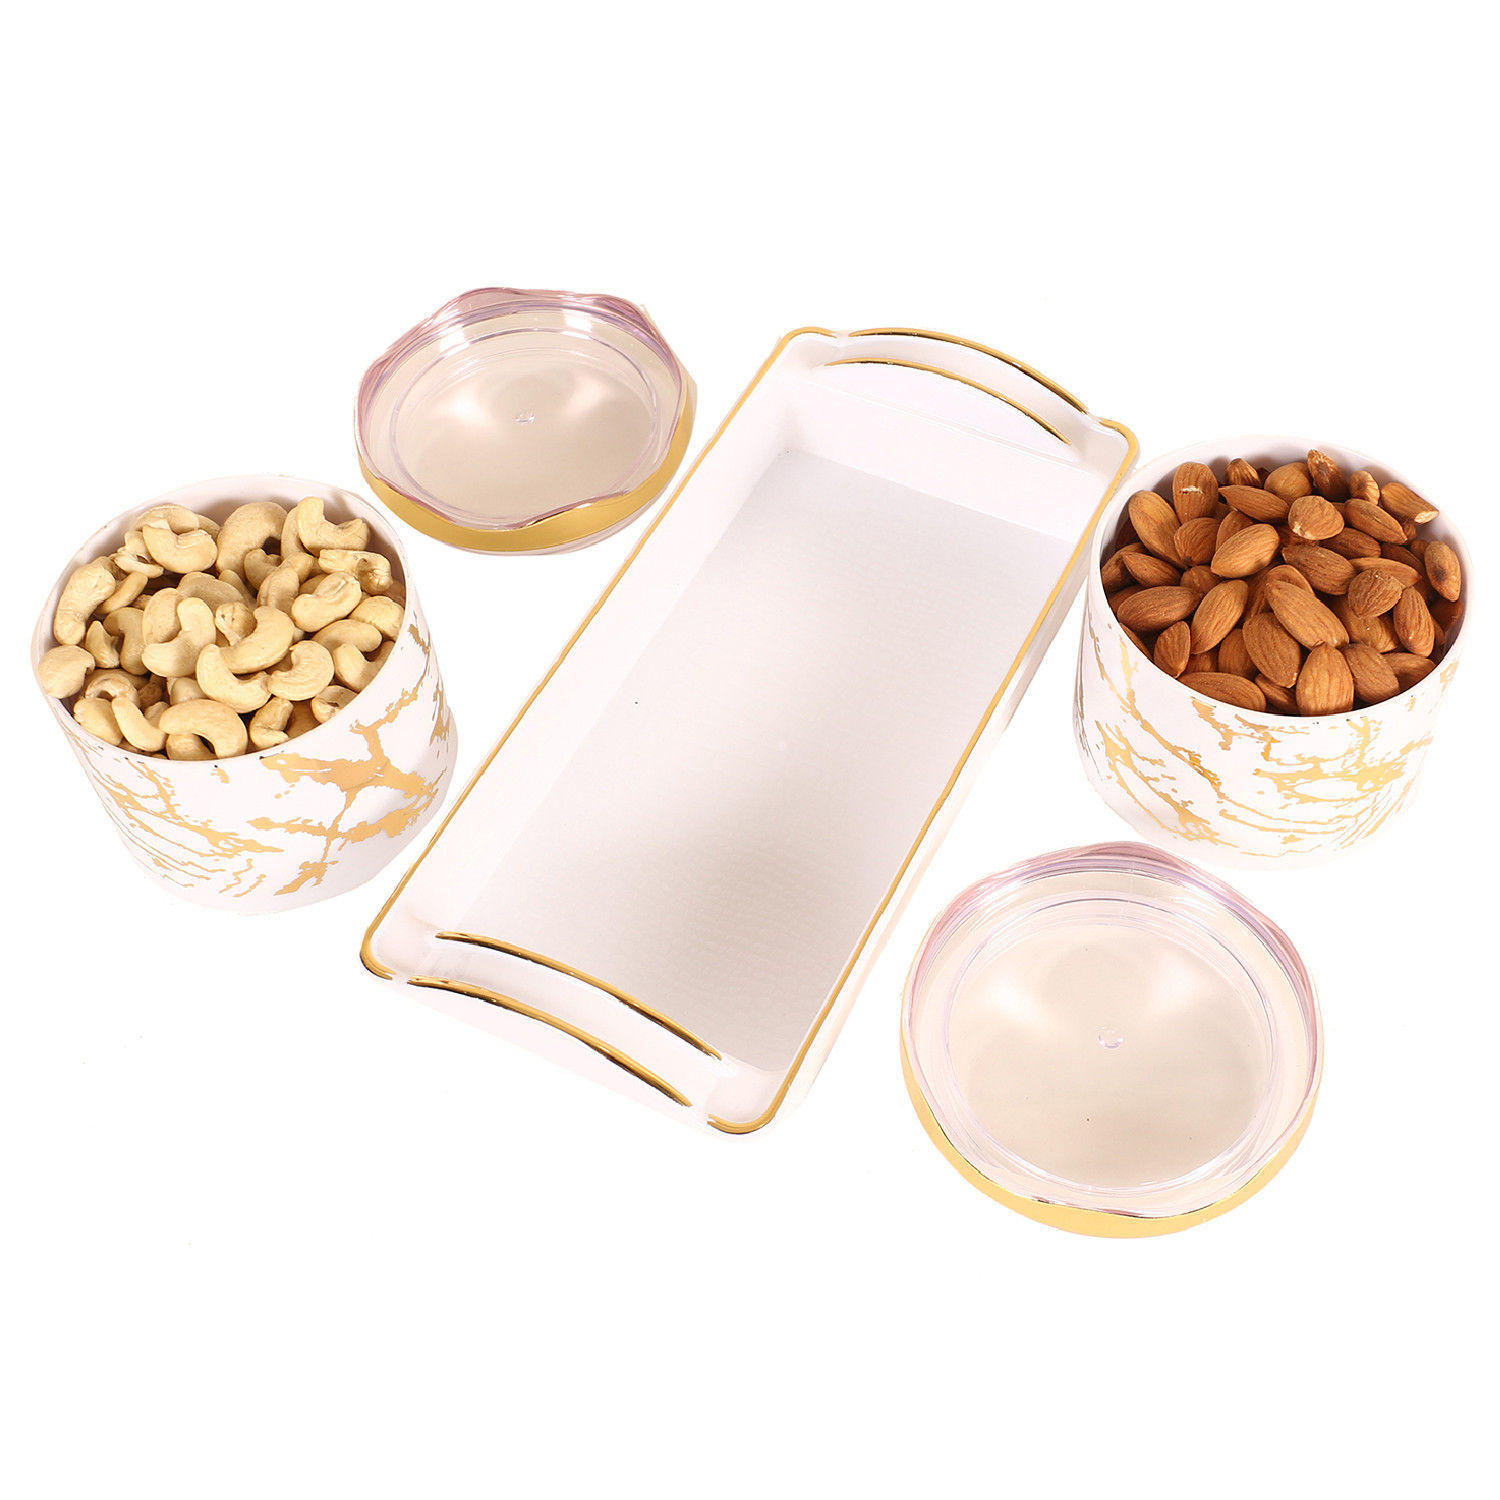 Kuber Industries 2 Containers & Tray Set|Unbreakable Plastic Snackers,Cookies,Nuts Serving Tray|Airtight Containers with Lid,350 ml (White)